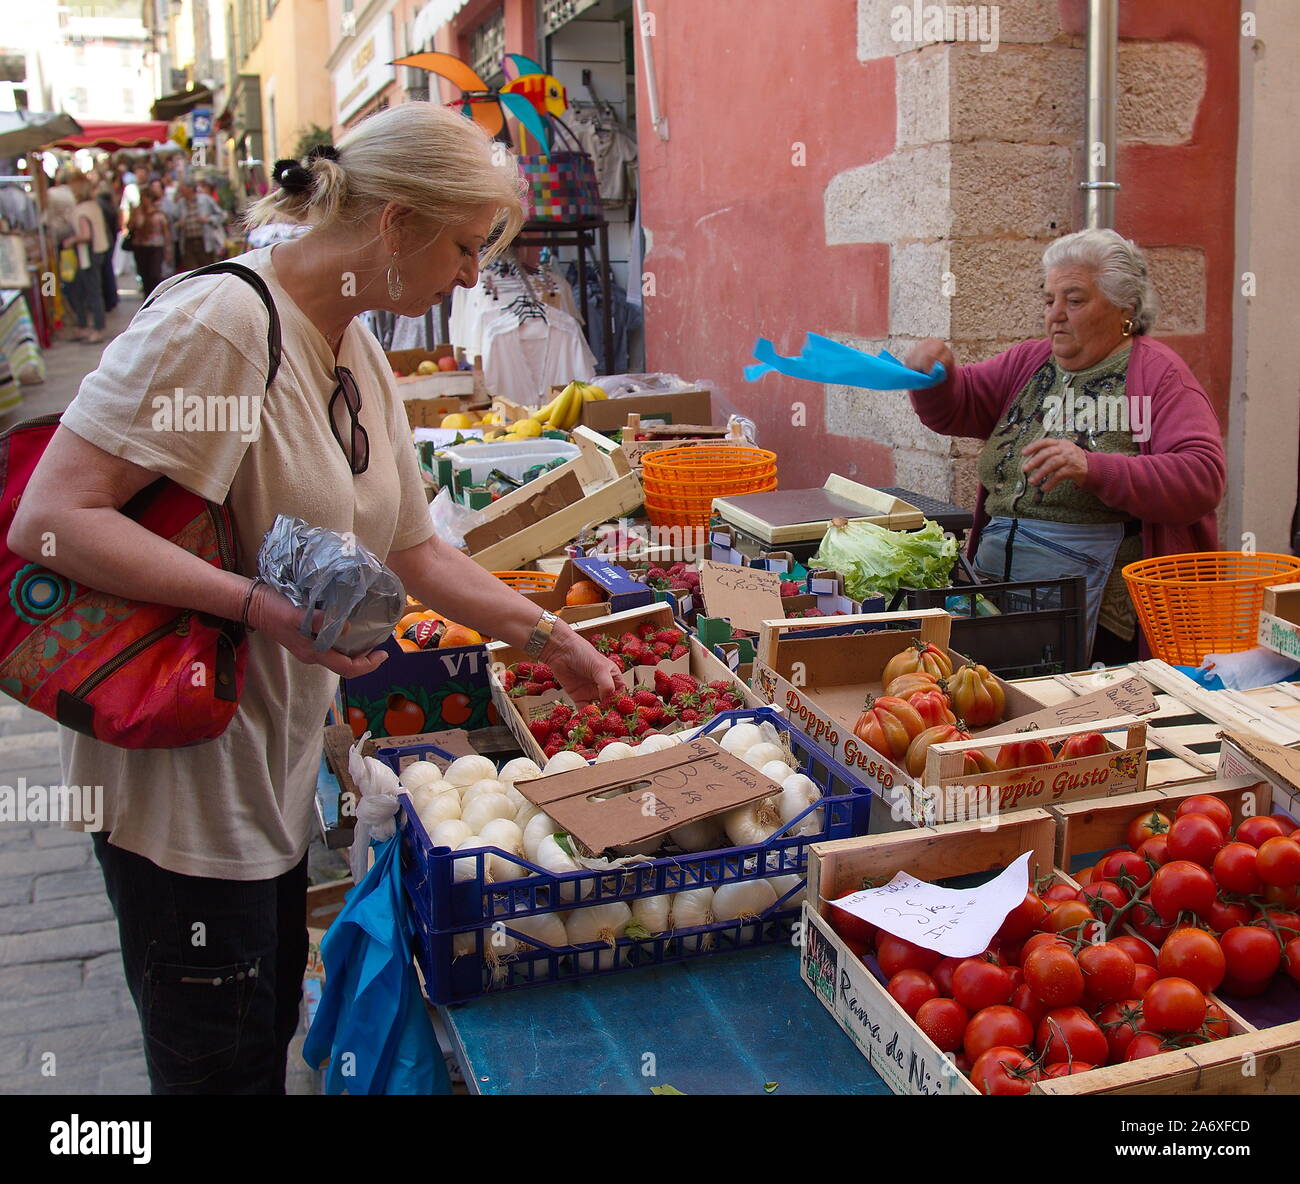 Customer choosing vegetables at a stall in the market square of Valbonne, Riviera, Provence, France Stock Photo